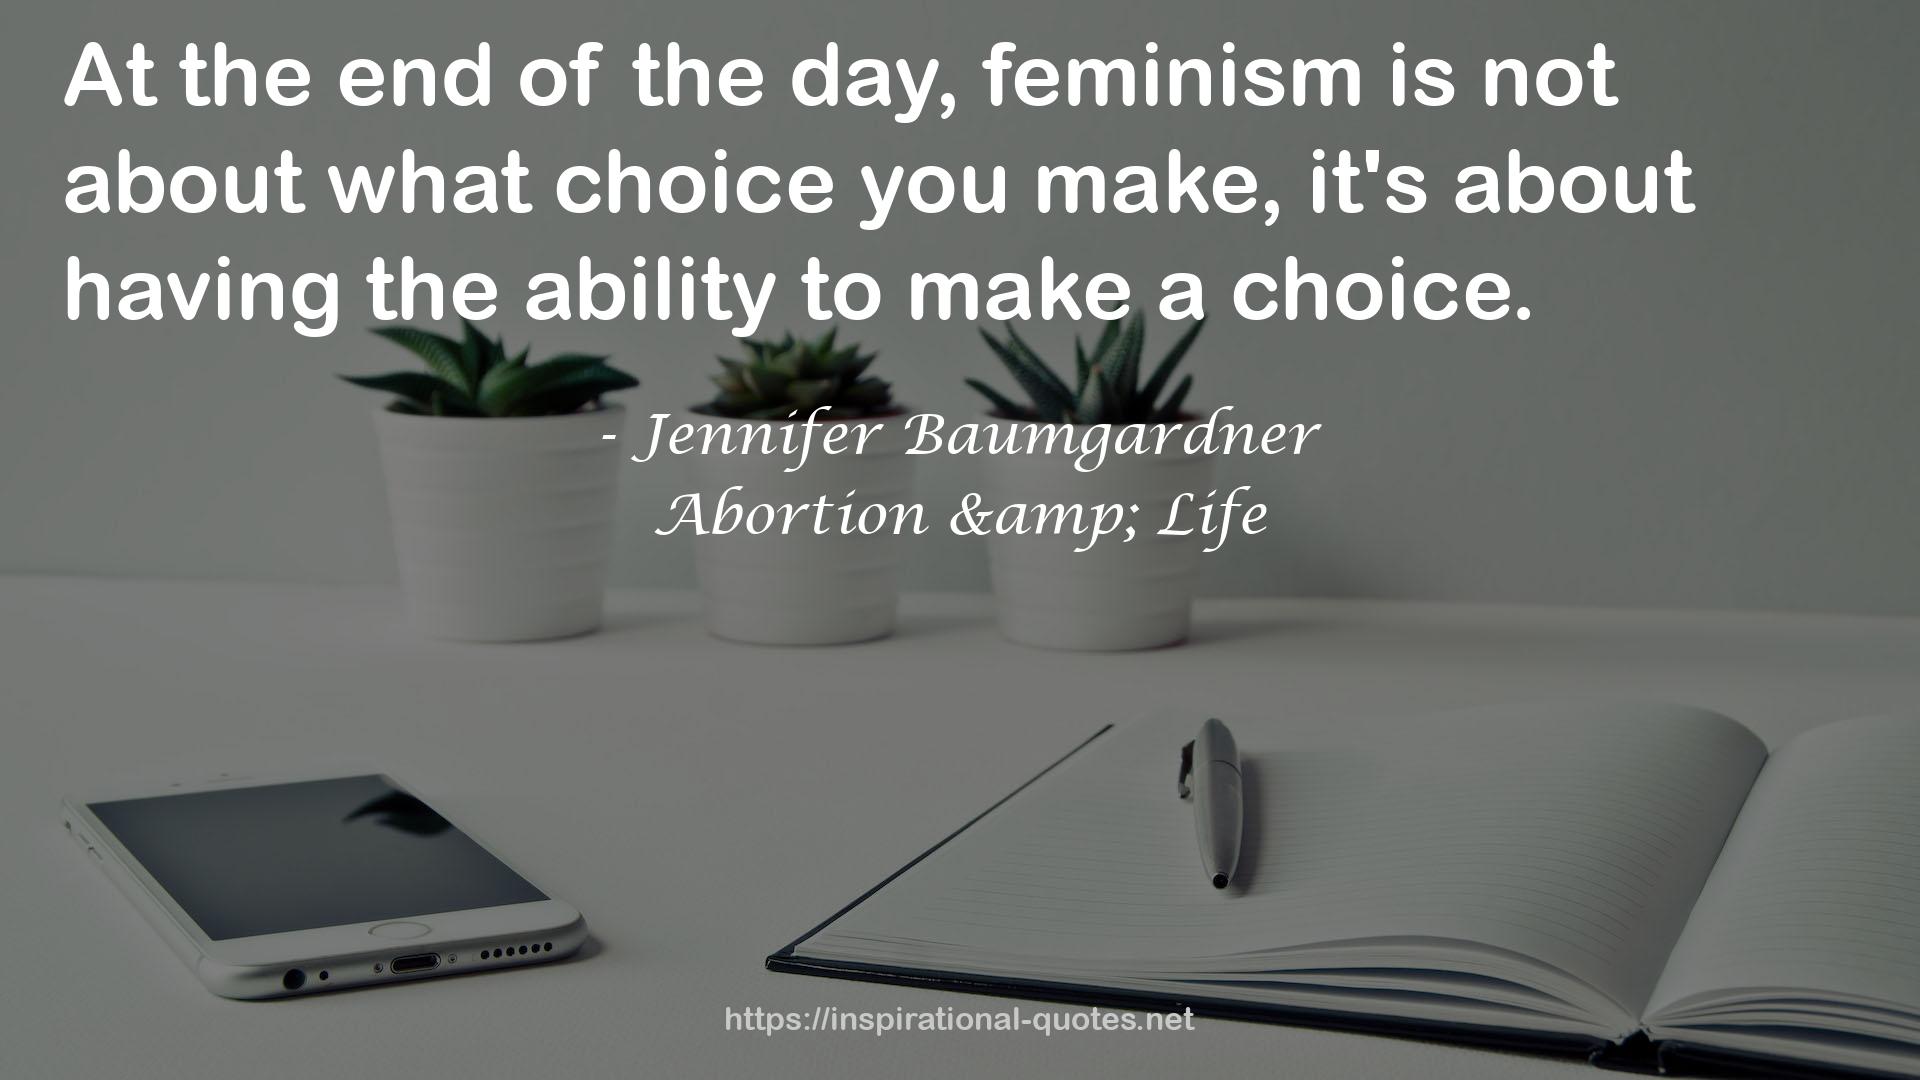 Abortion & Life QUOTES